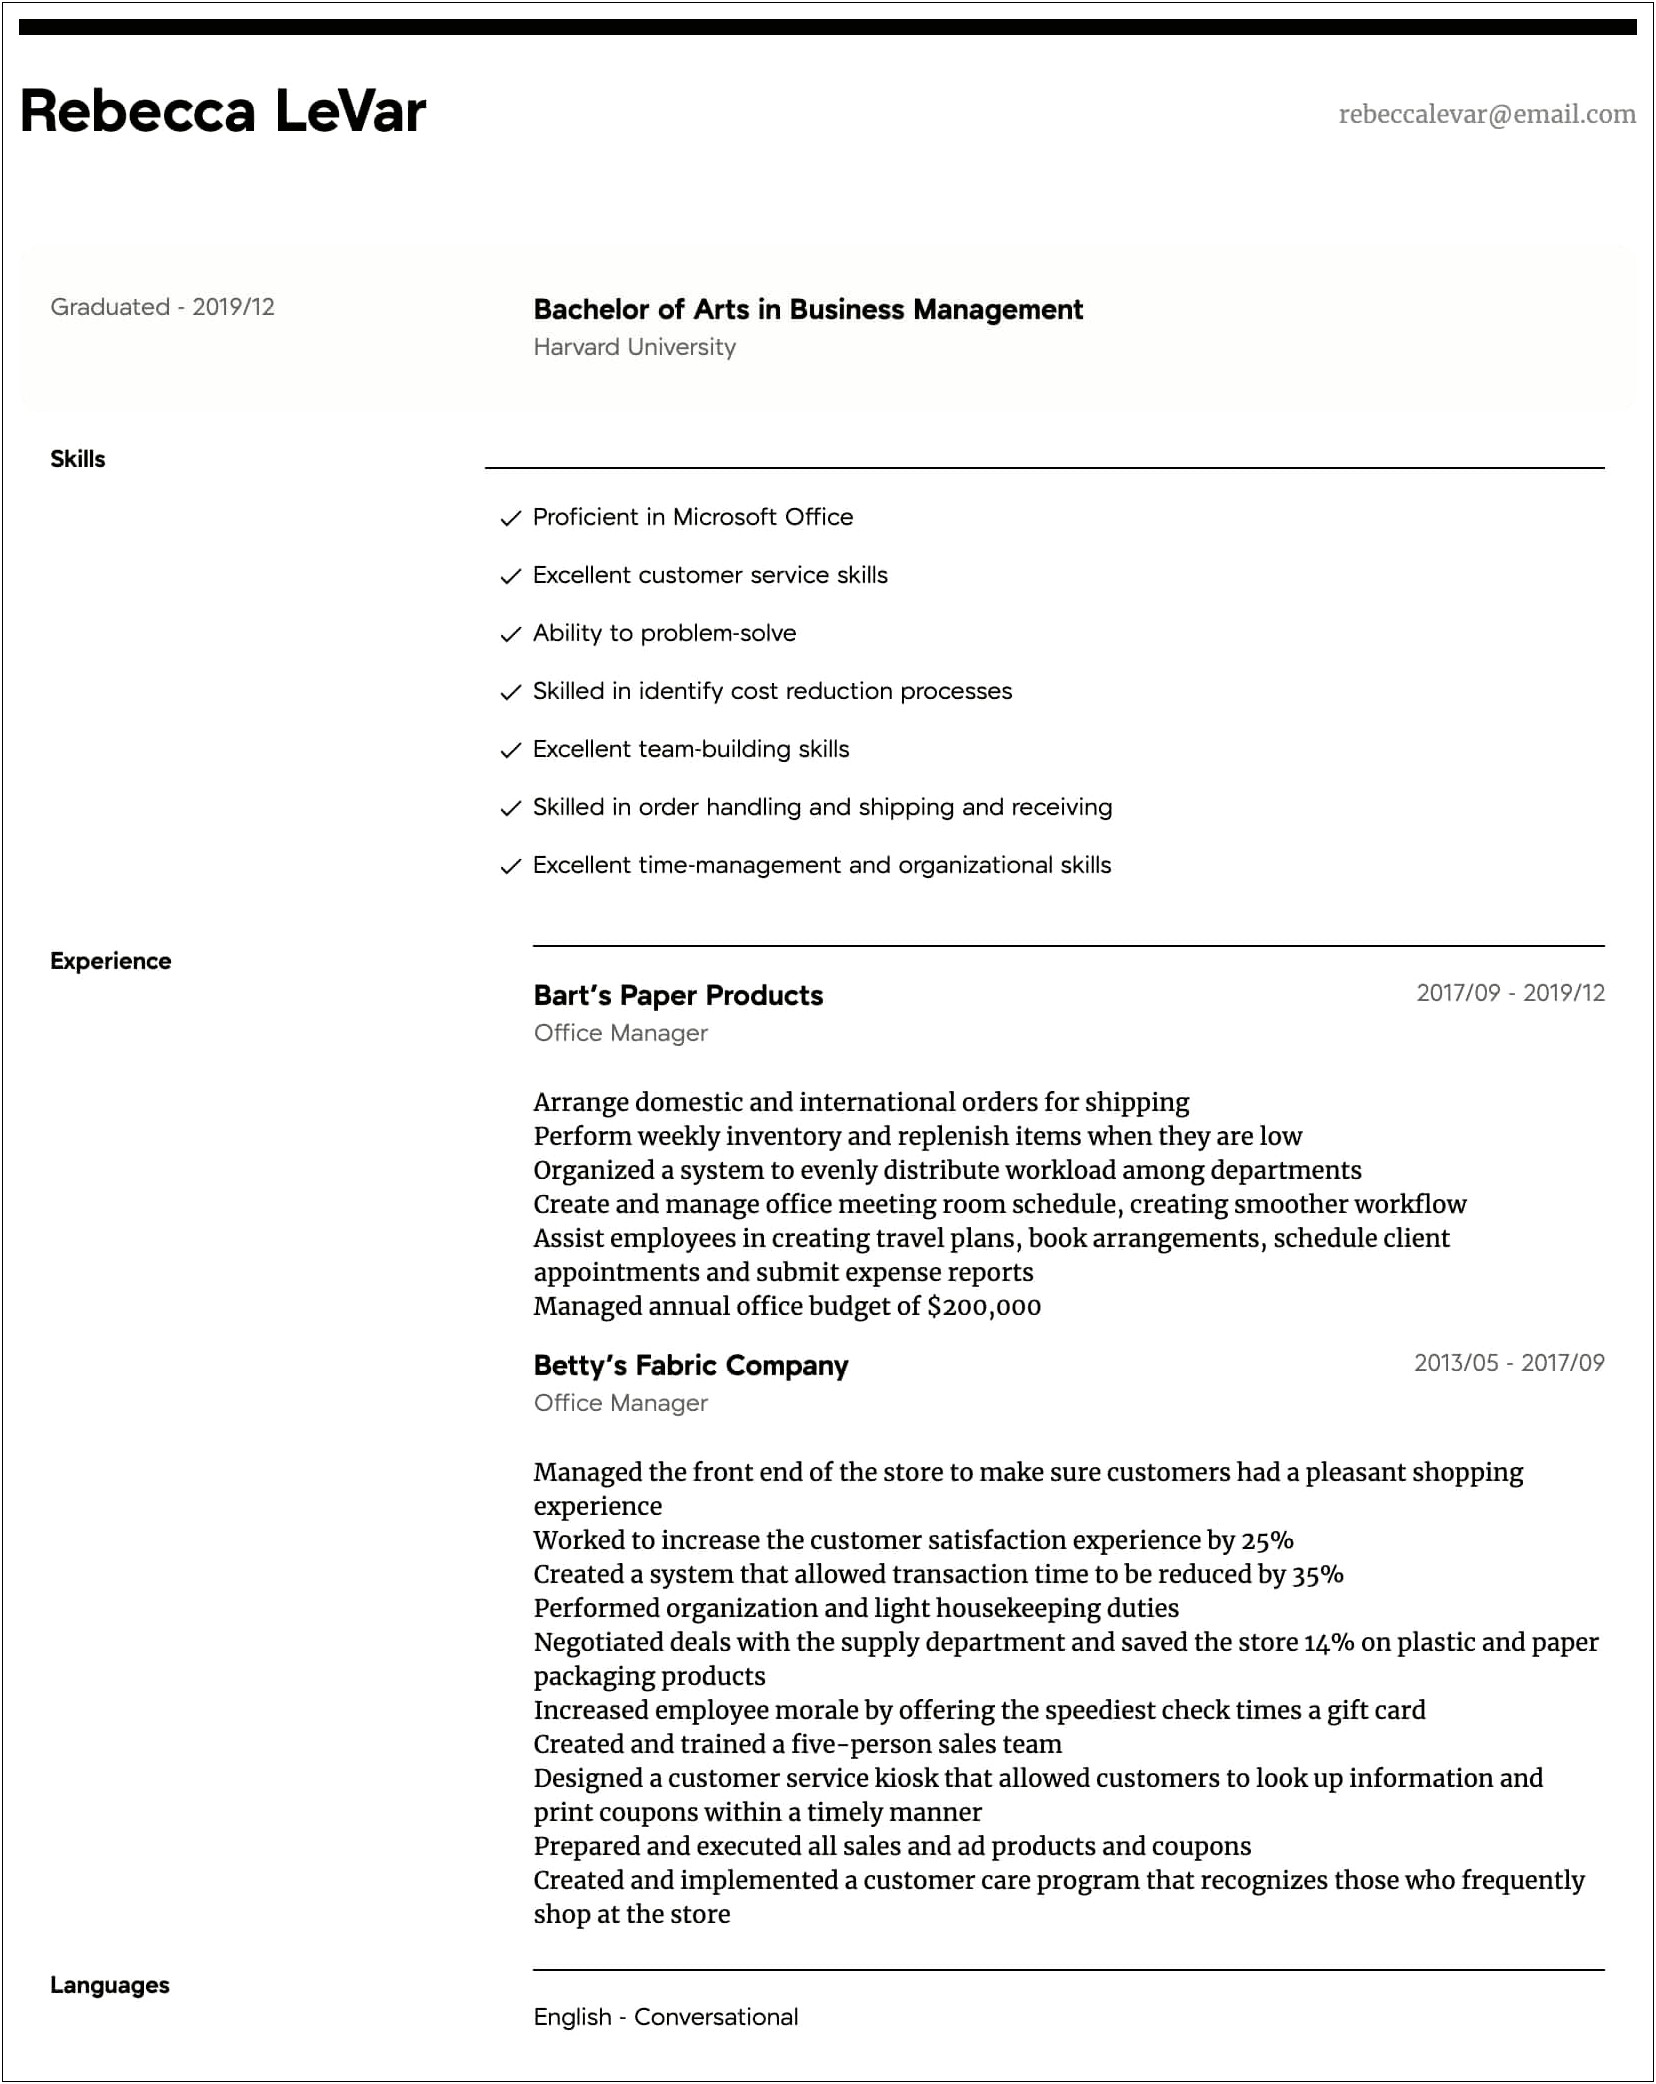 Resume Samples For Shipping And Receiving Manager